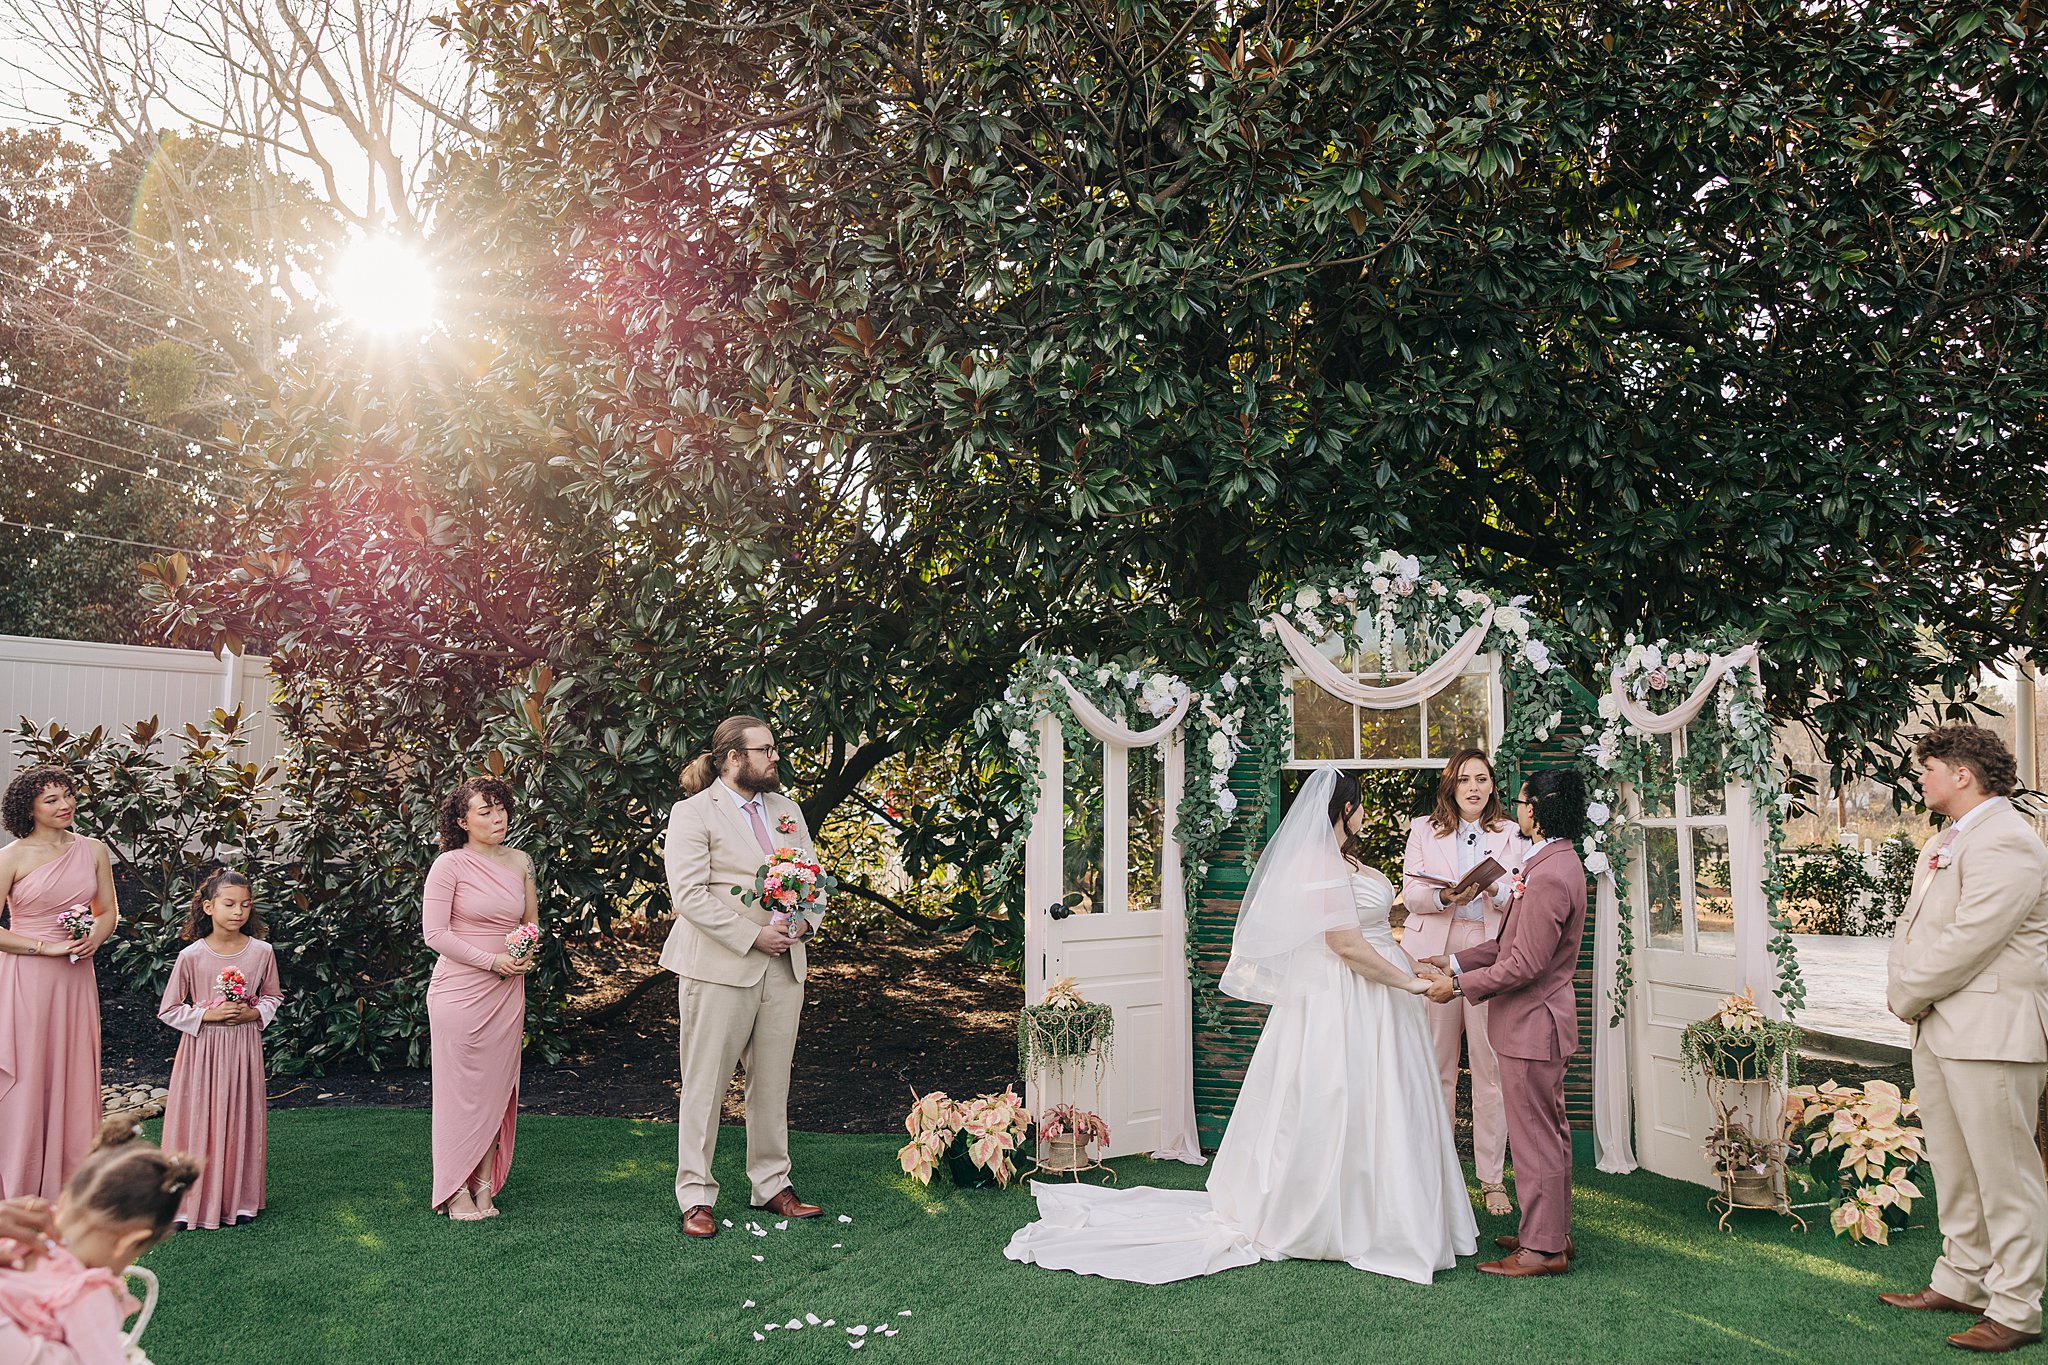 Newlyweds stand holding hands at sunset under a large Magnolia tree during their ceremony